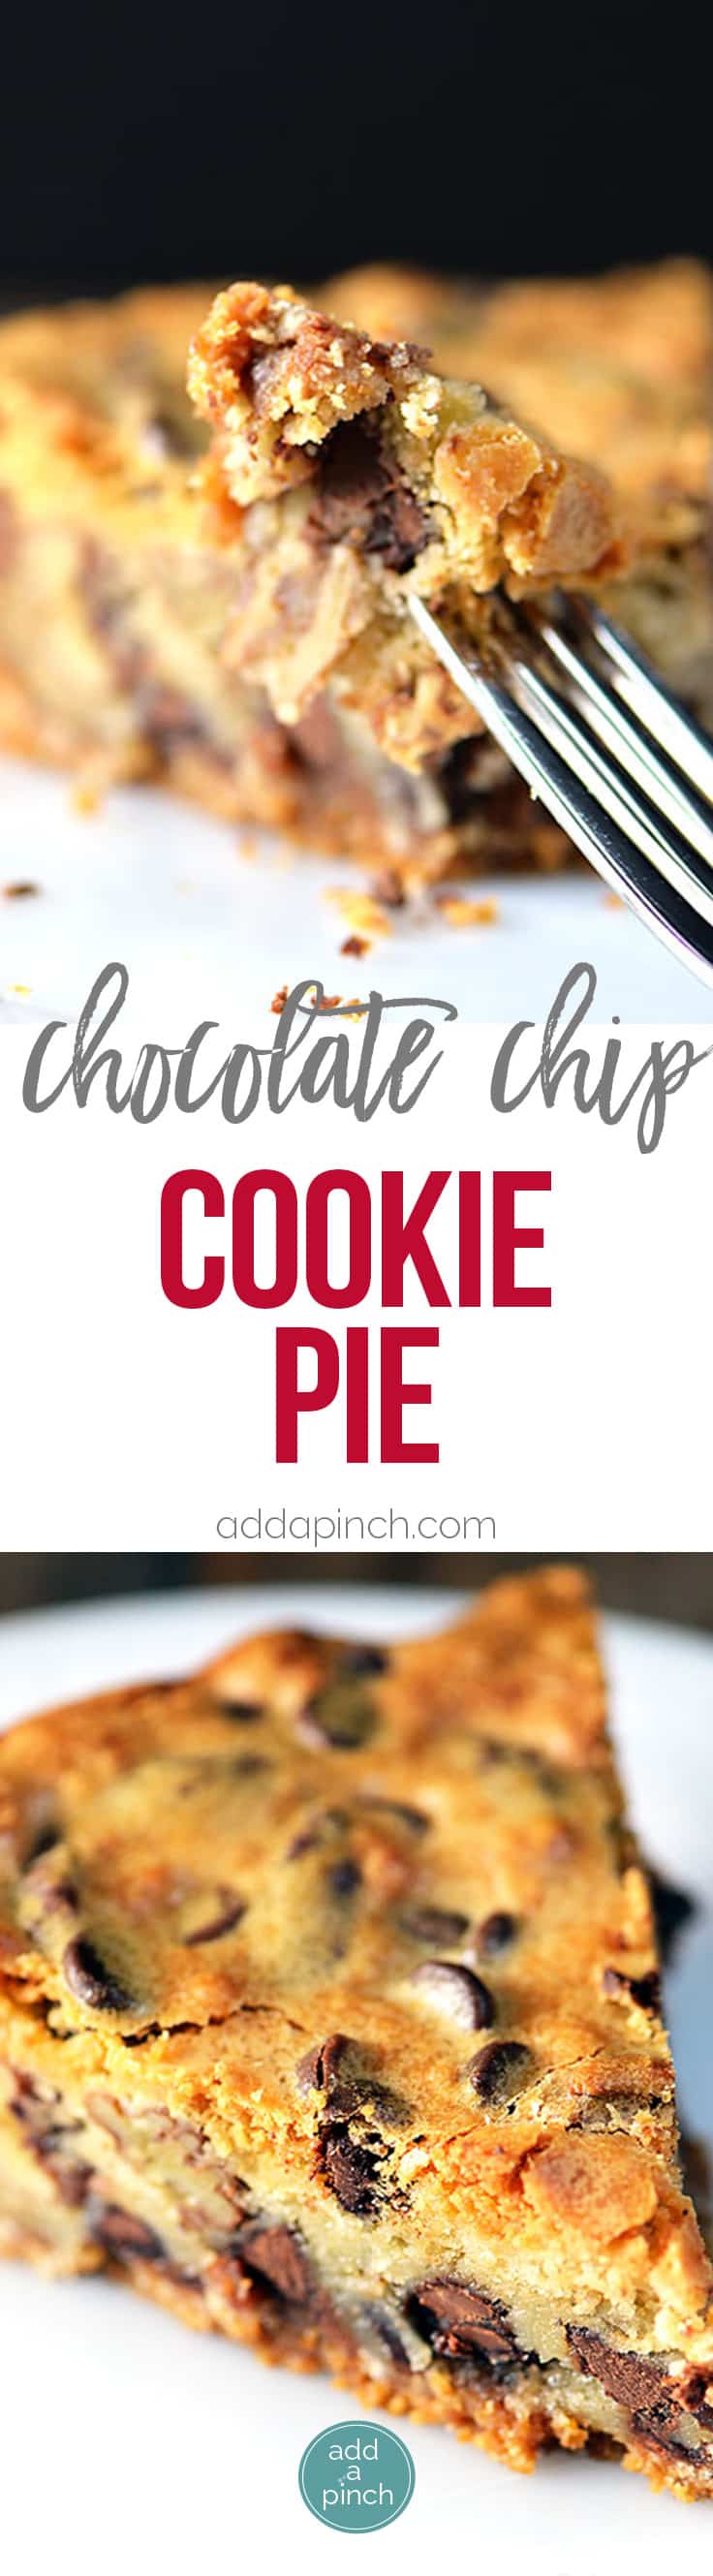 KK's Chocolate Chip Cookie Pie Recipe - Chocolate Chip Cookie Pie makes a delicious pie recipe that everyone loves, especially the kids! Get this family favorite, easy chocolate chip cookie pie! // addapinch.com